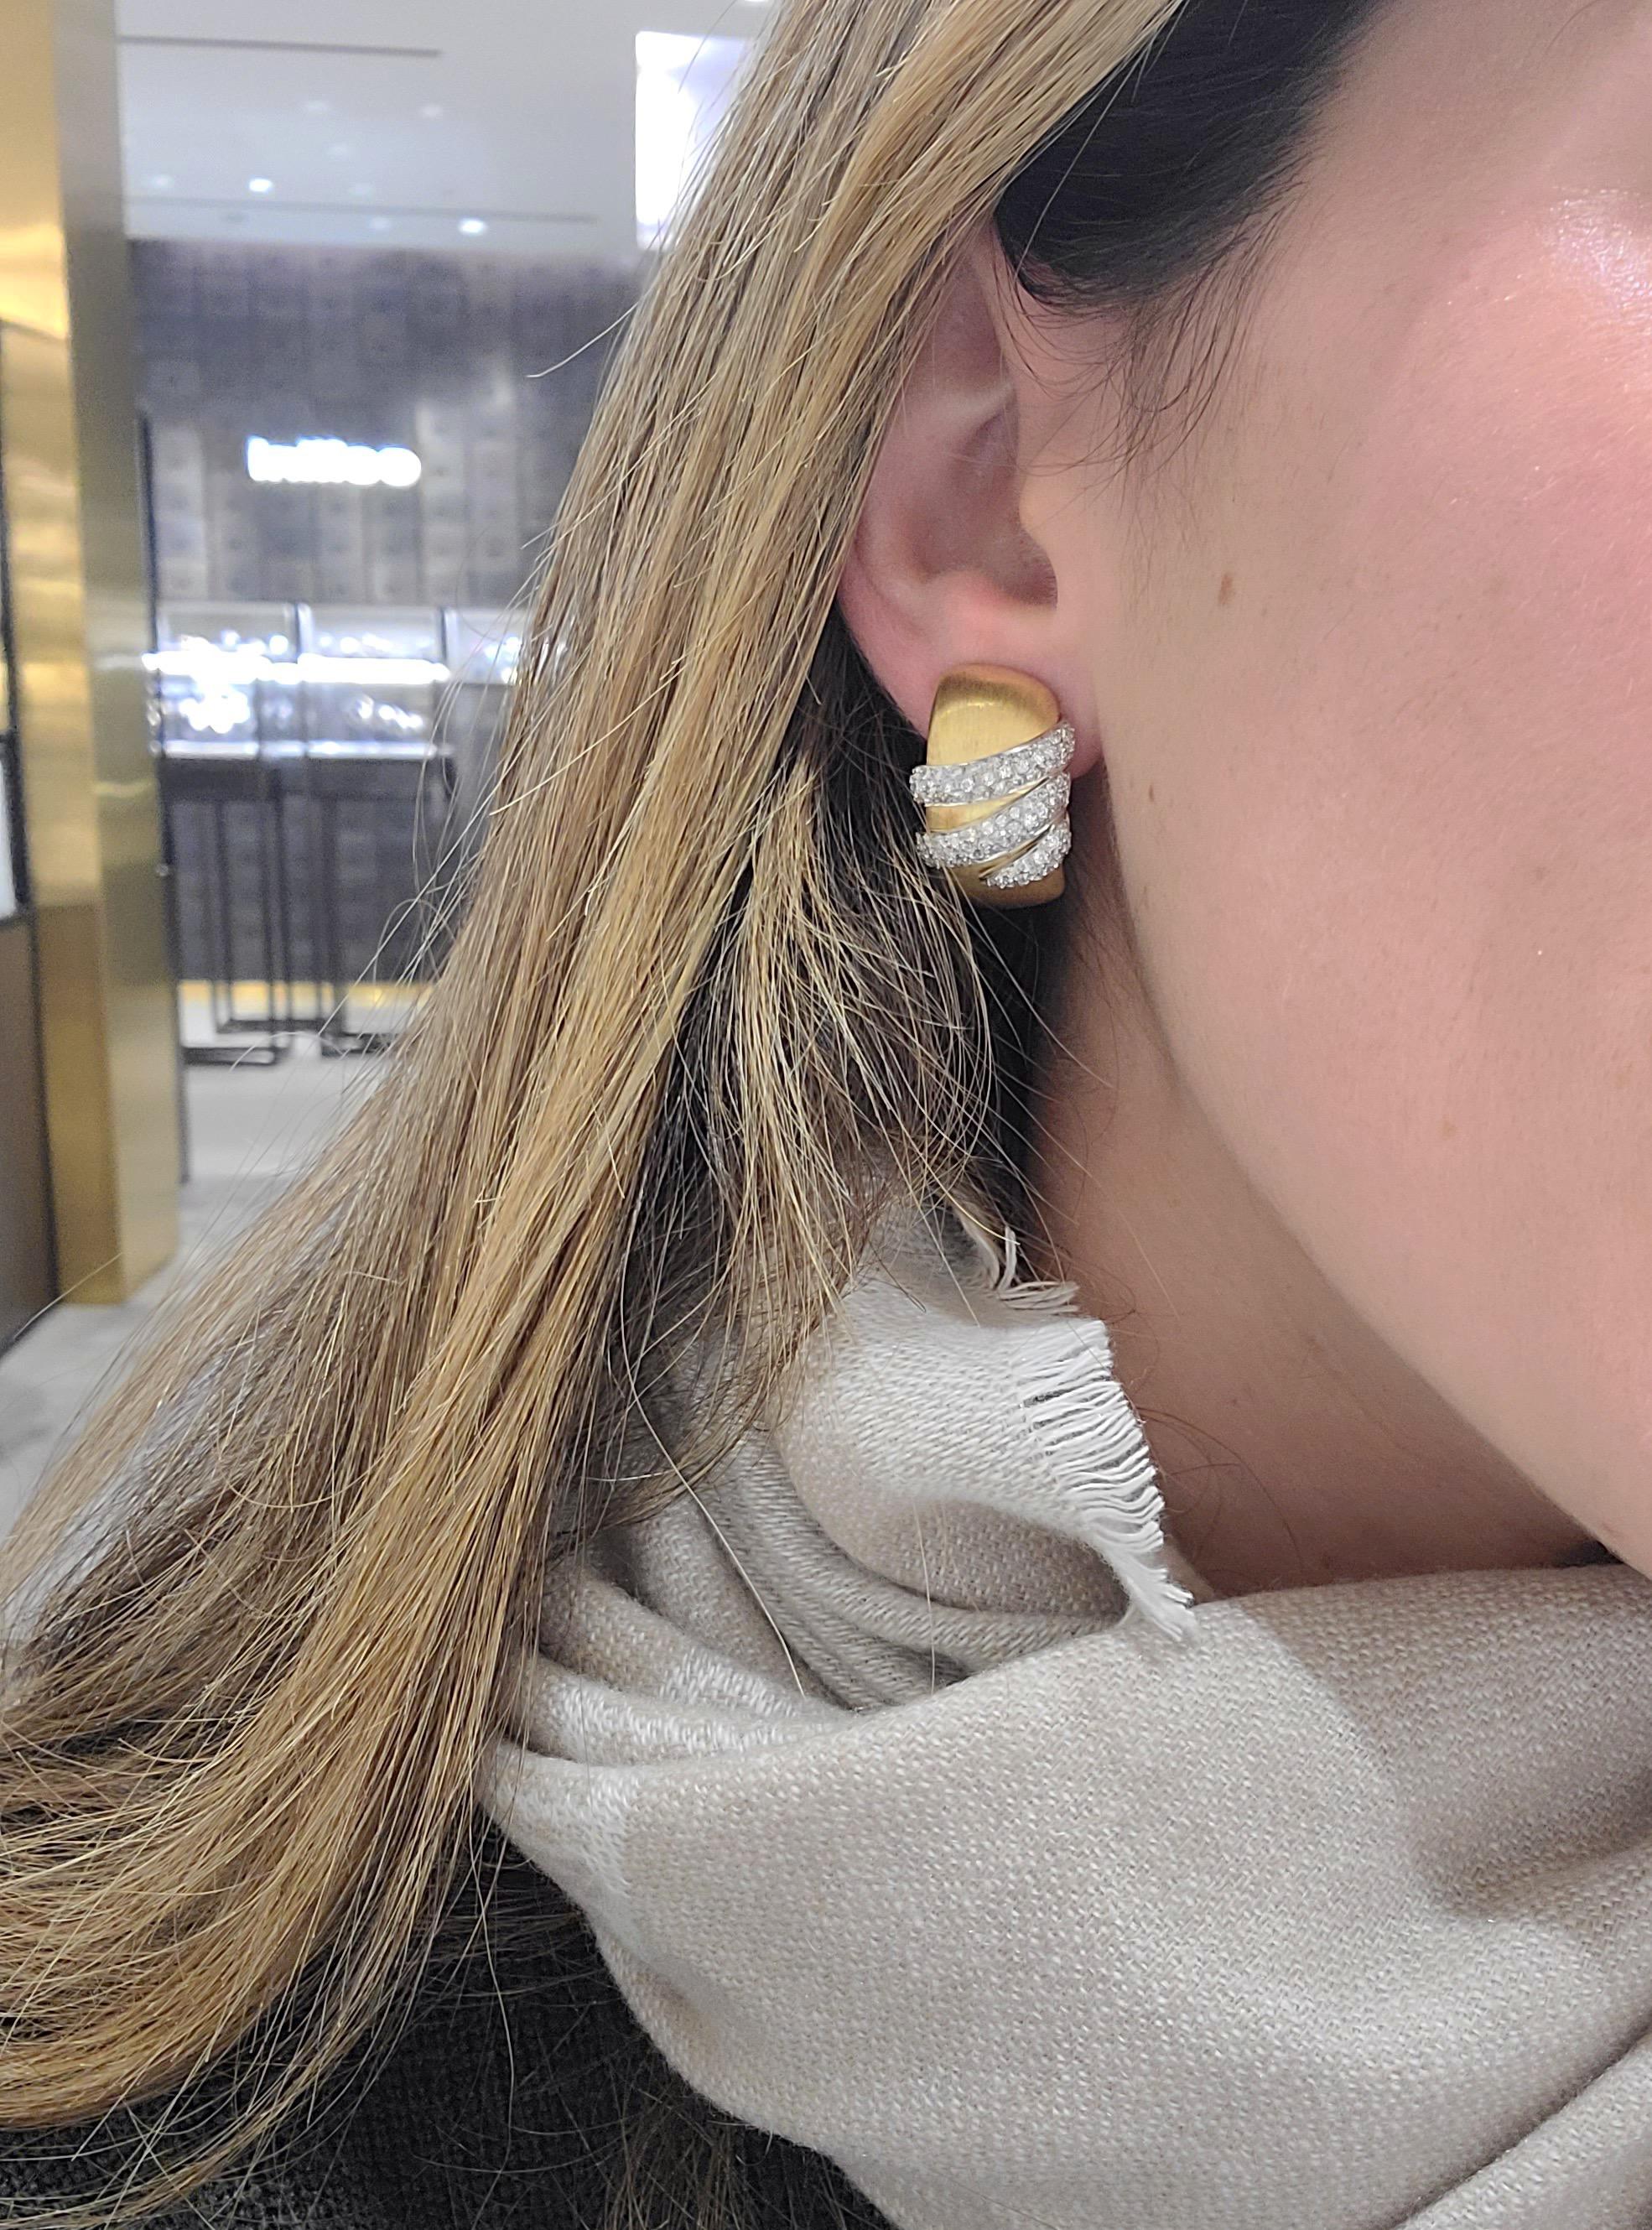 Designed by G. Verdi of Italy exclusively for Cellini Jewelers NYC, these elegant earrings are set in 18 Karat Brushed yellow gold, and accented with 1.54Ct. Of round brilliant diamonds set in 18KT. White Gold, which appear to gracefully wrap around